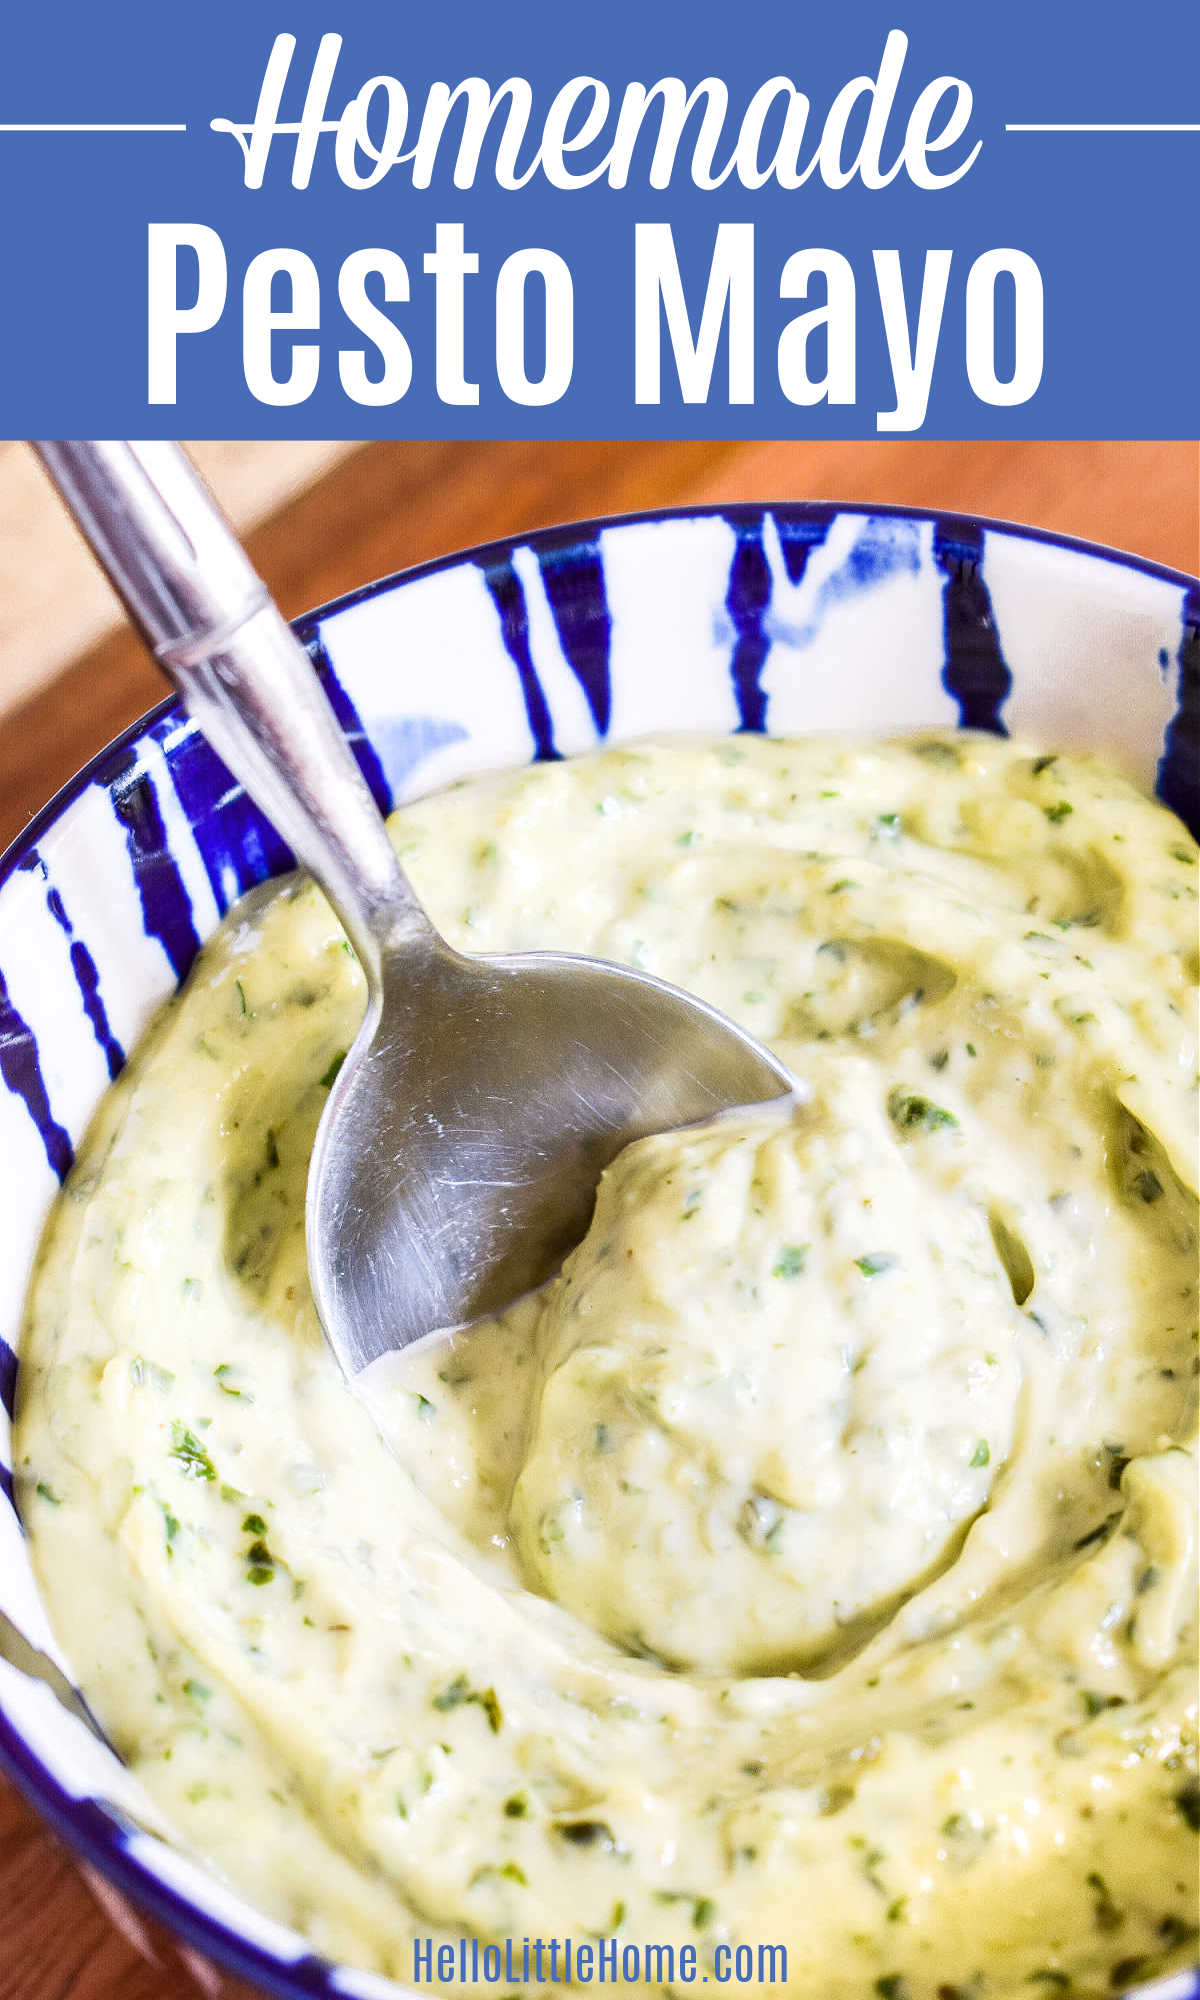 A spoon in a bowl of Pesto Mayo.